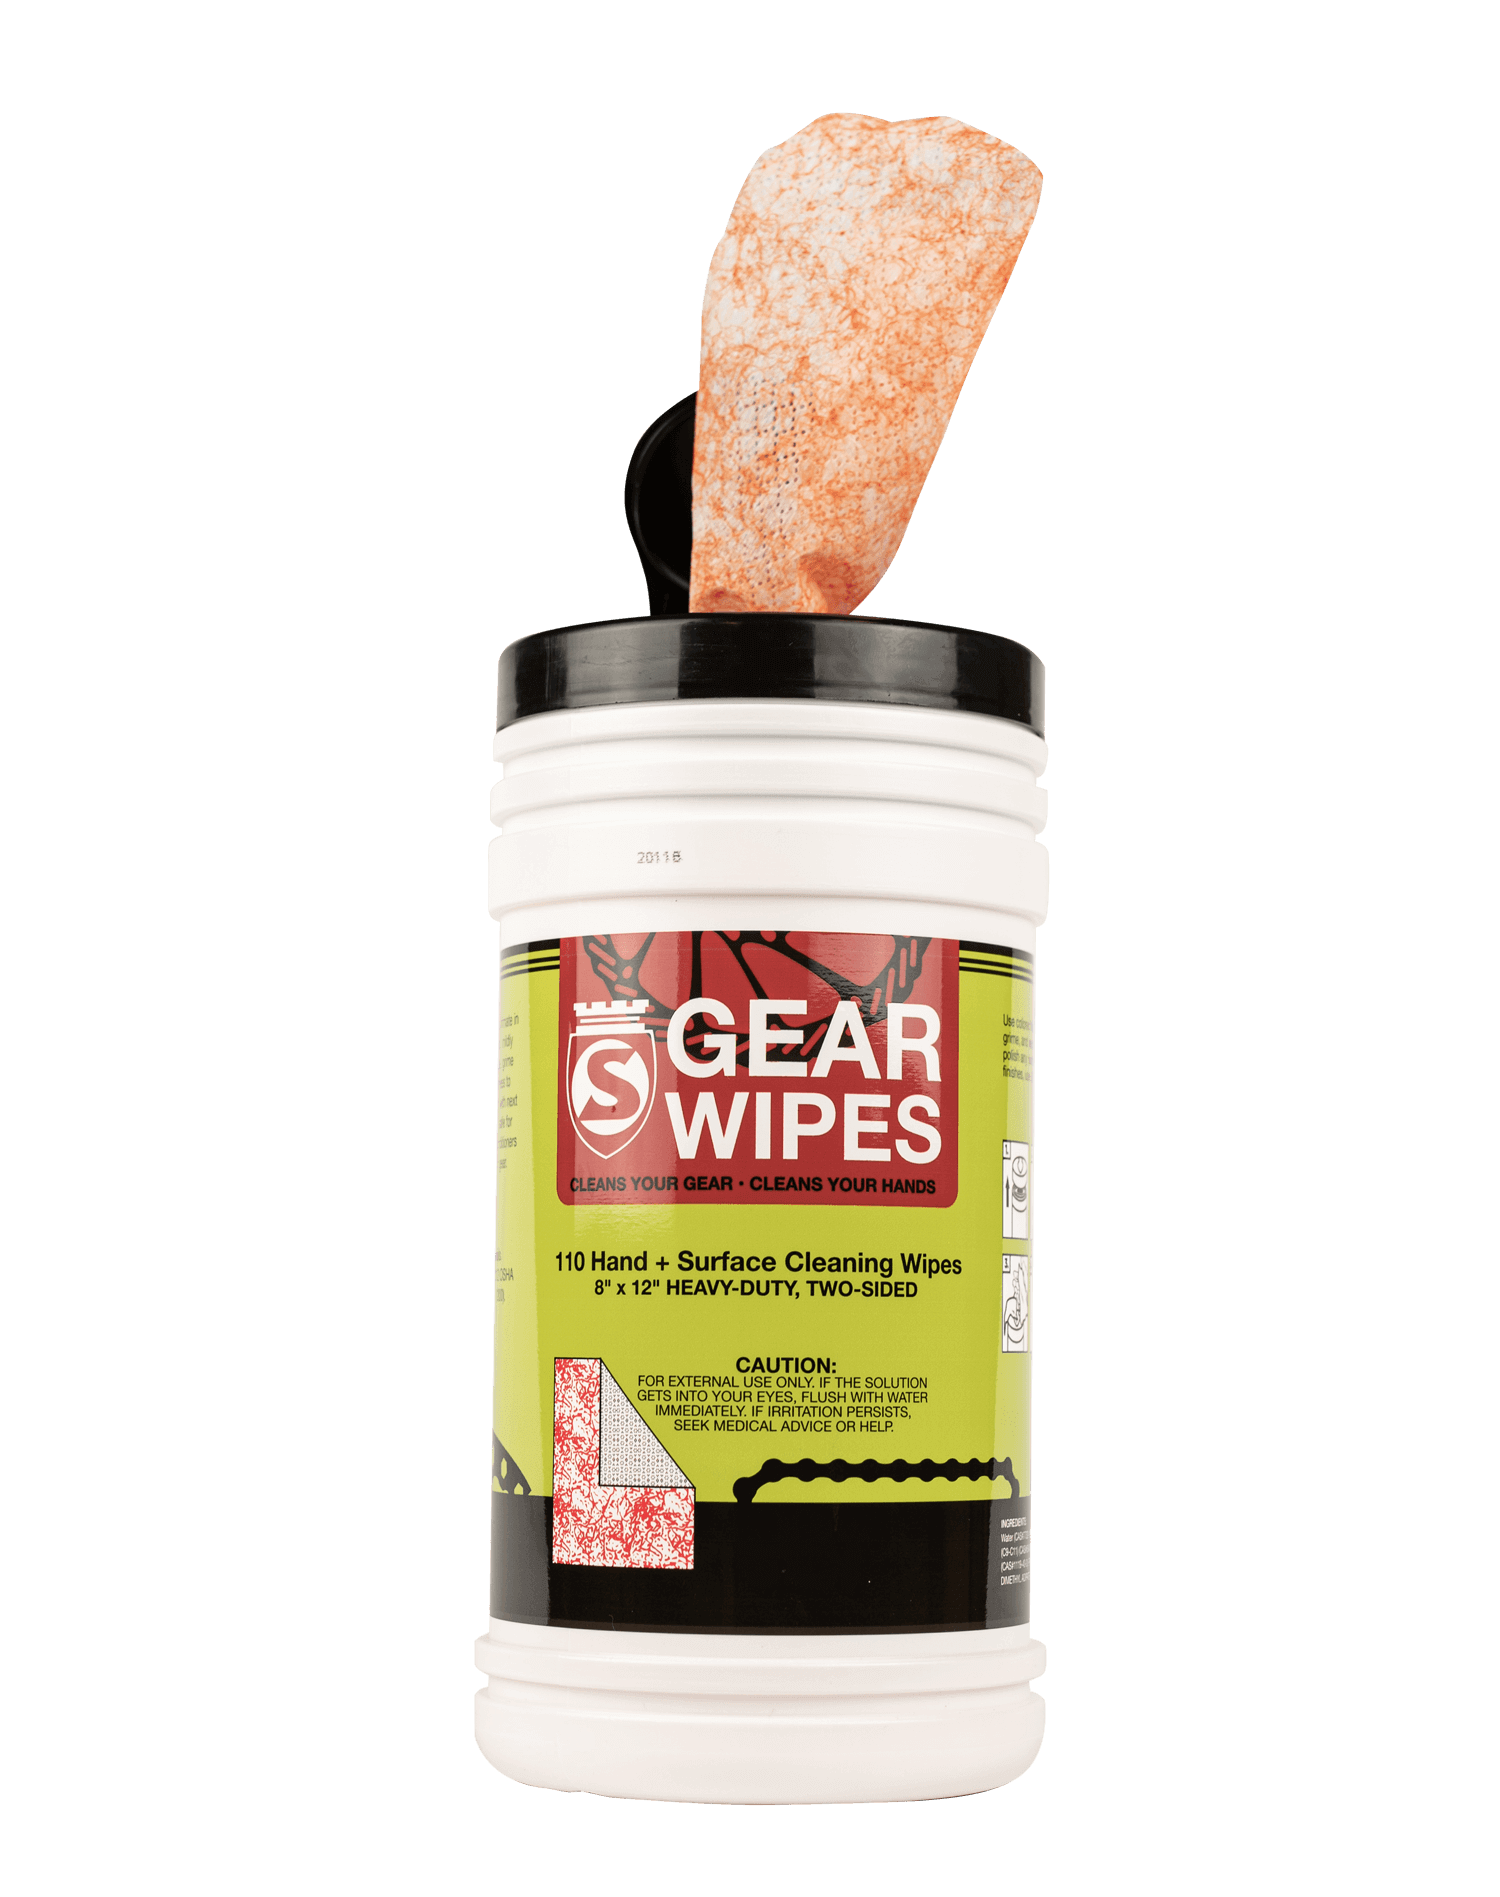 Mechanic Hand Wipes - Grease & Paint Remover Tool Cleaning Wipes